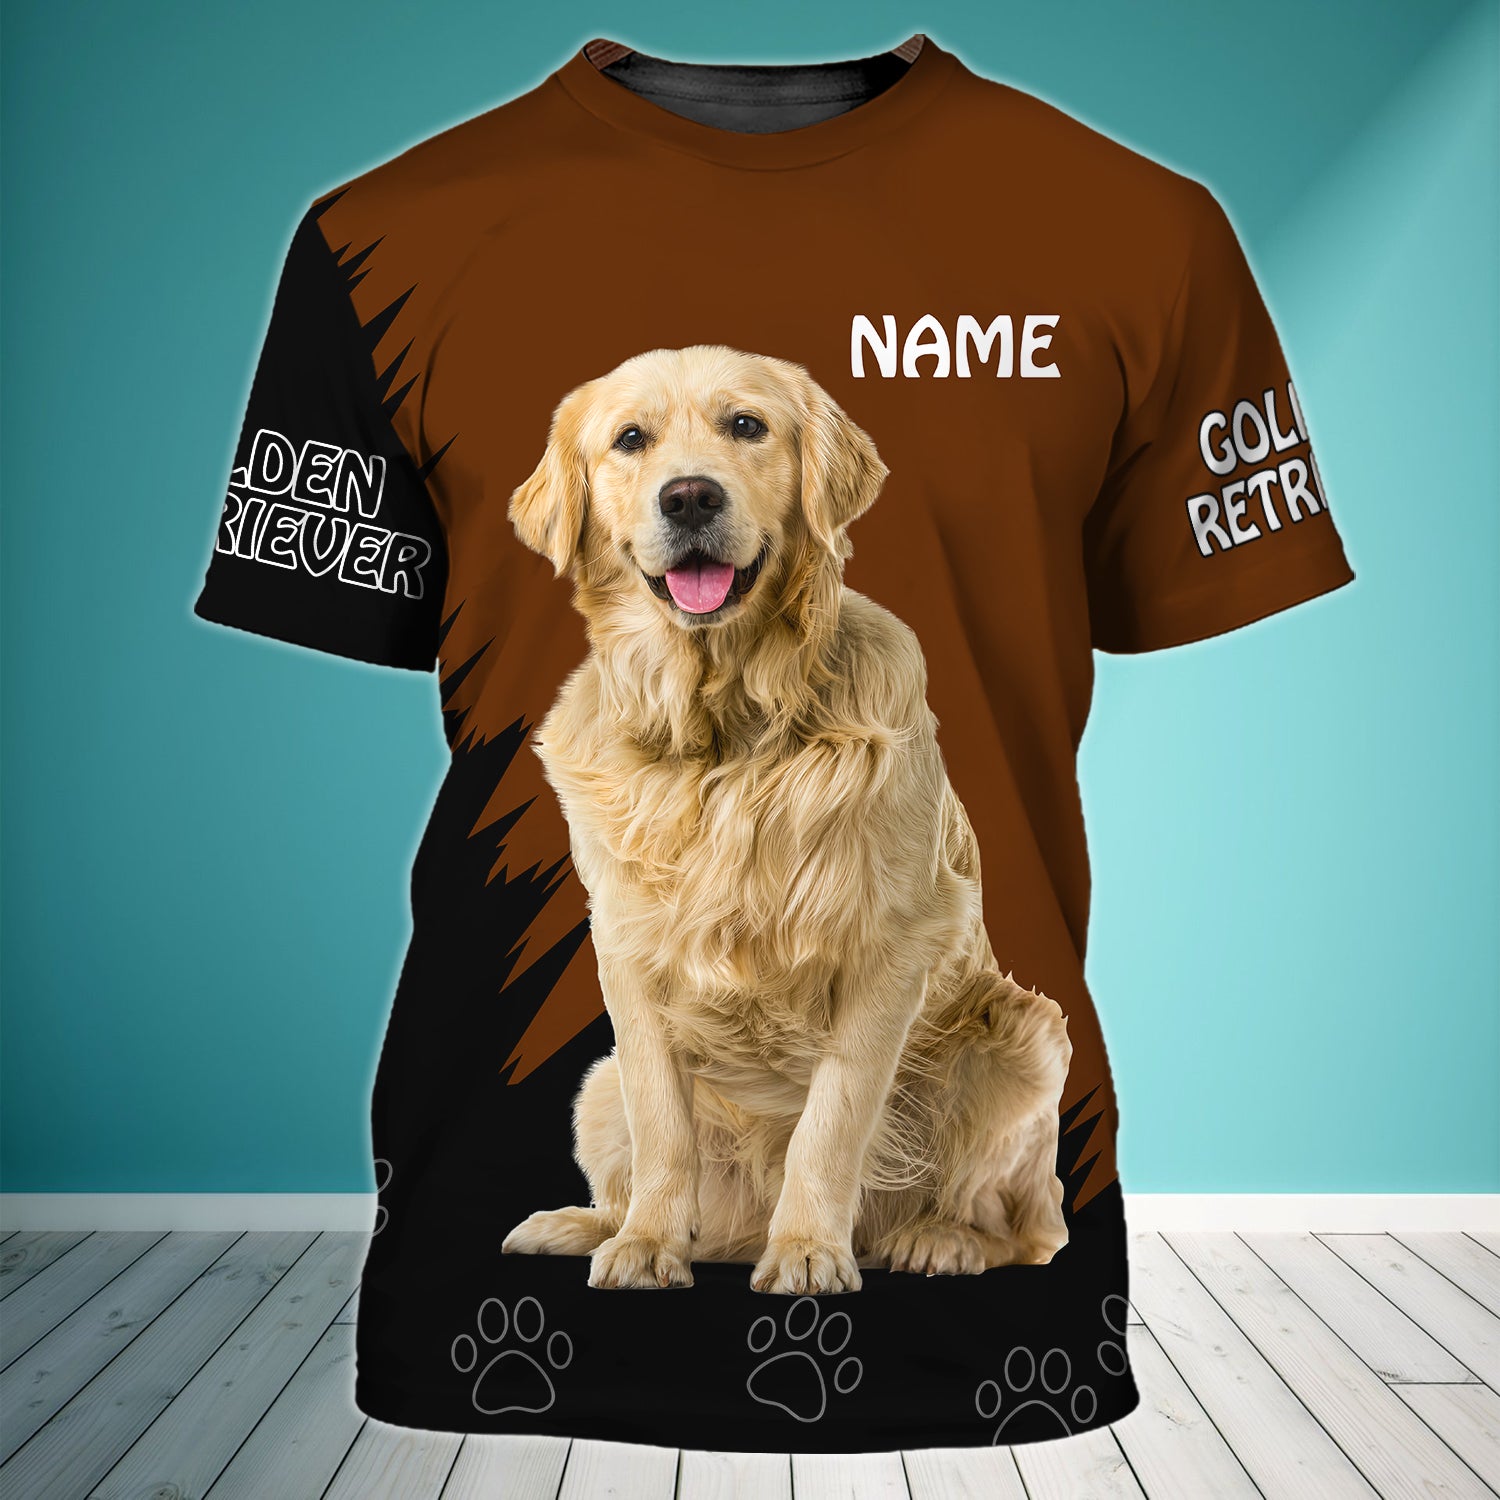 Stop Telling Me It's Just A Dog- Personalized Name 3D T Shirt - Loop-T2k-256